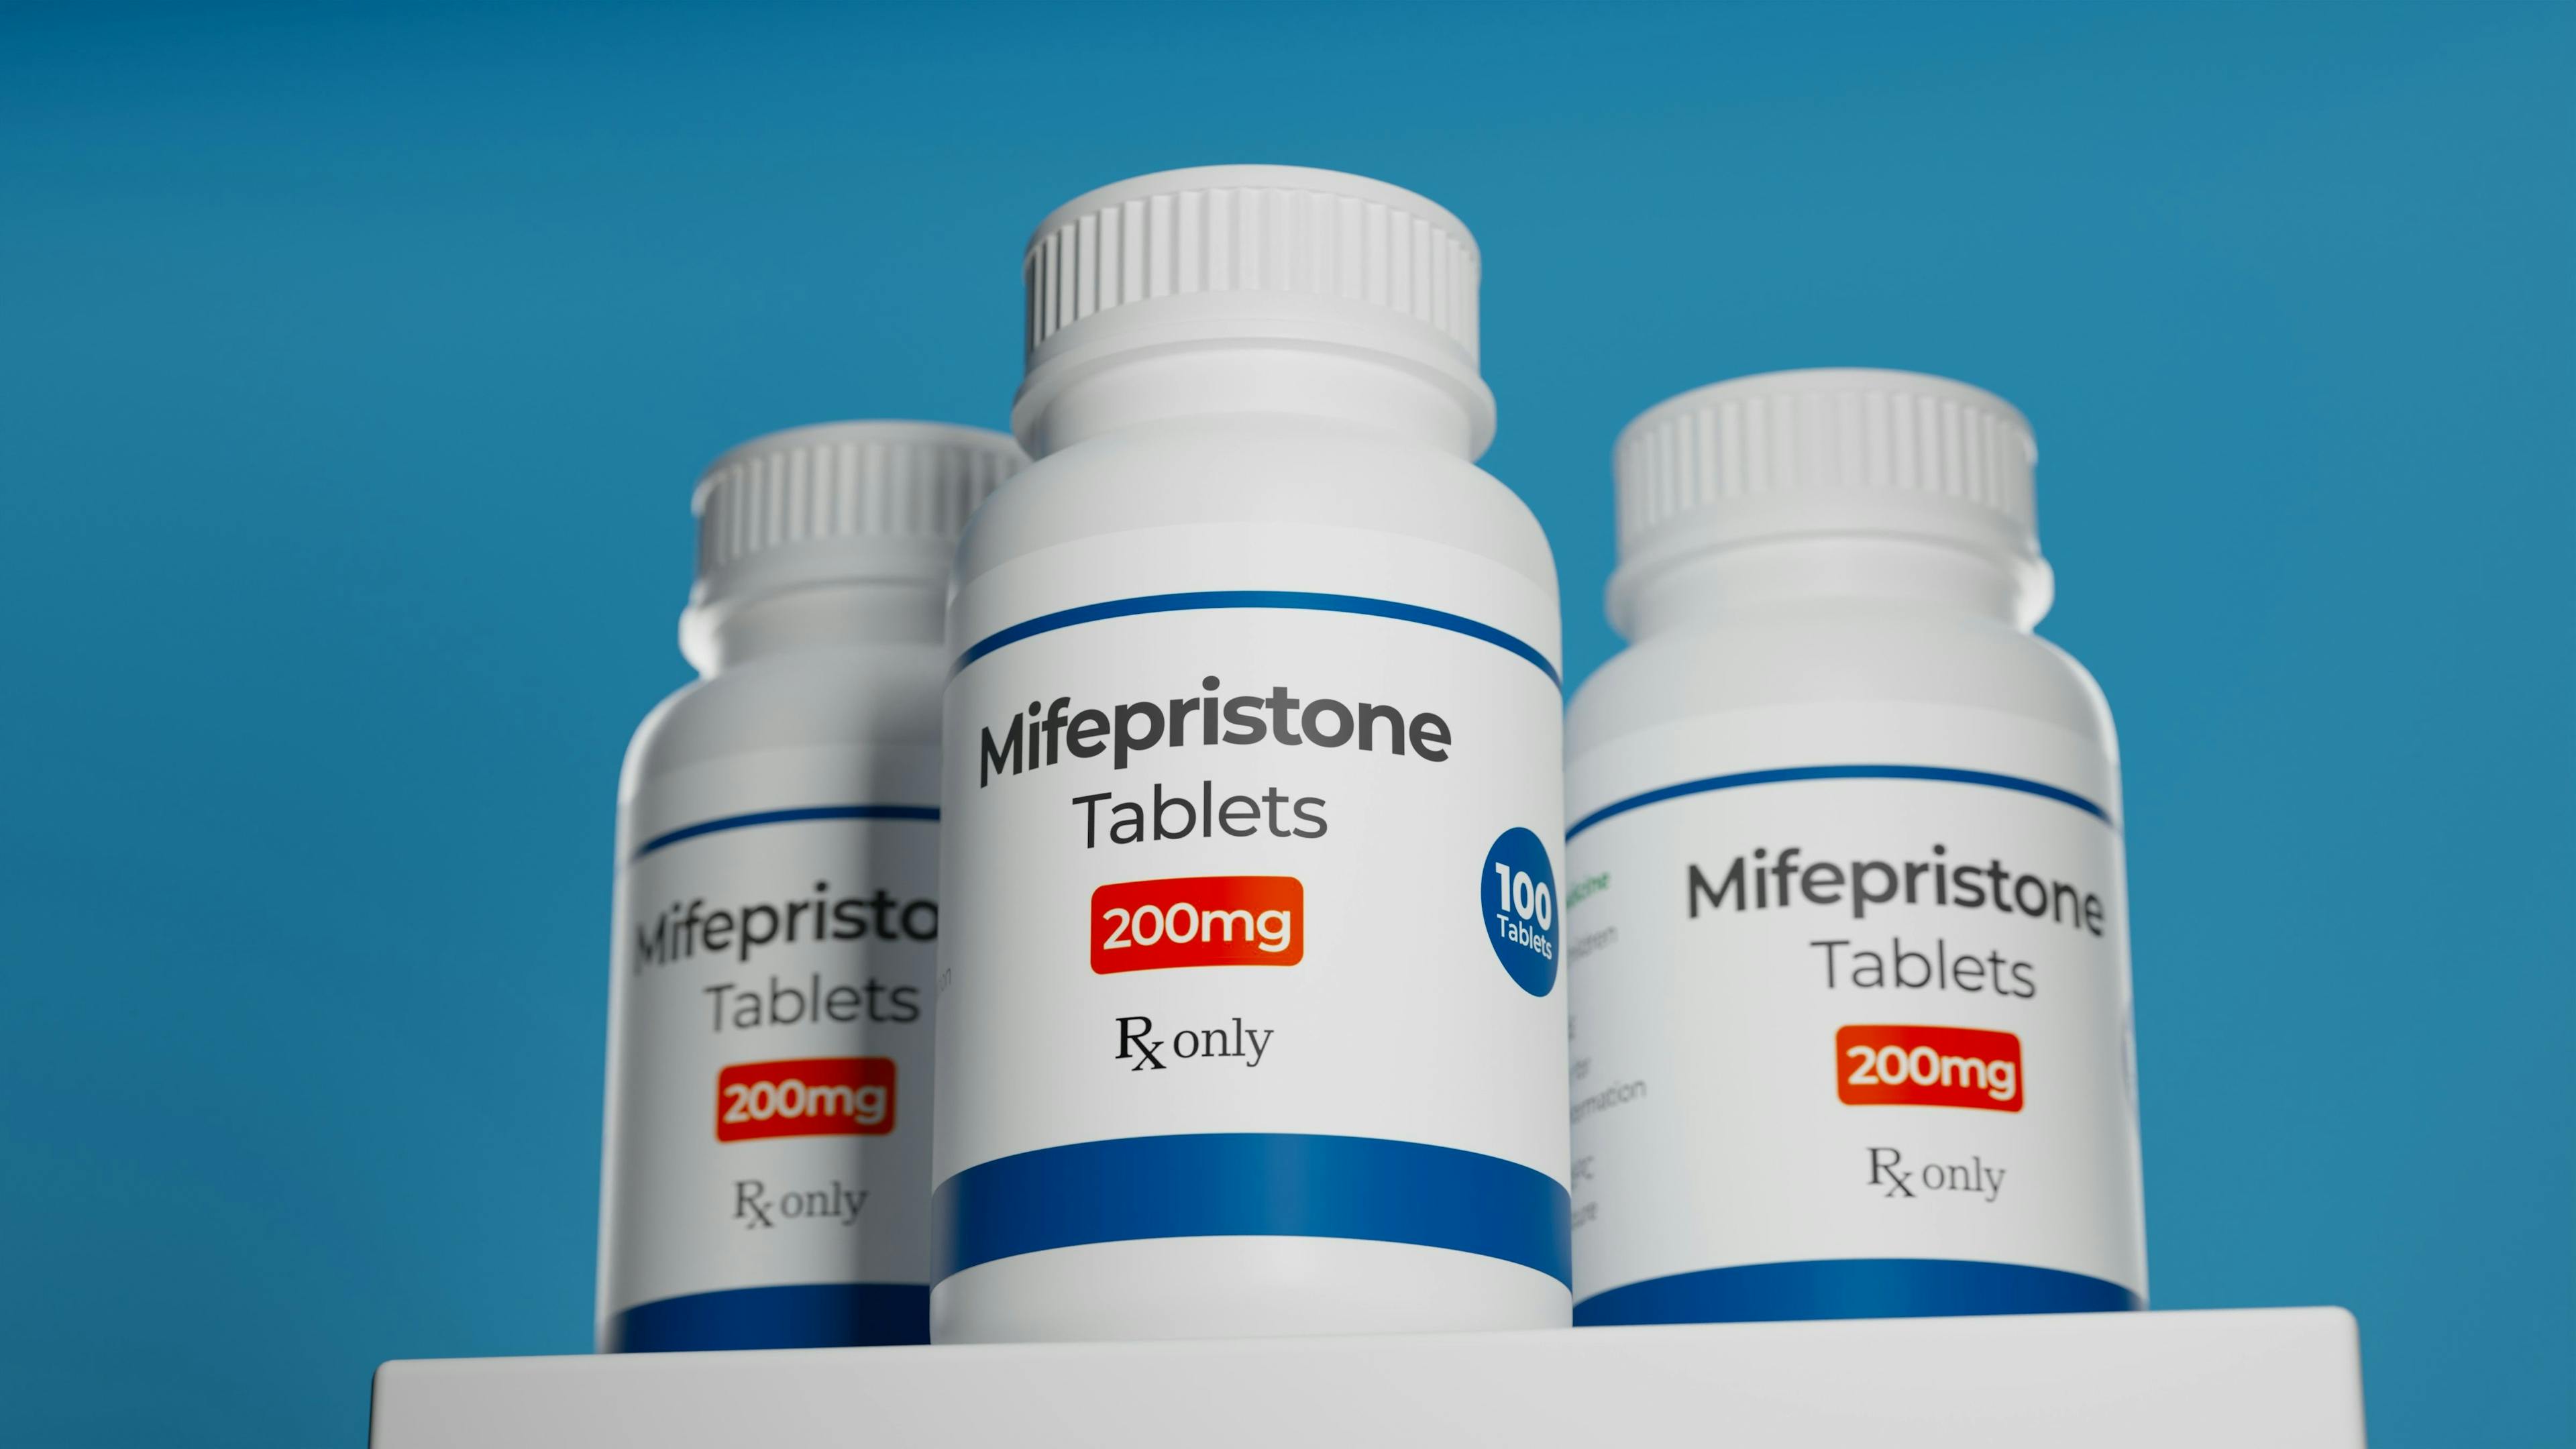 Walgreens and CVS will begin distributing mifepristone in certain stores this month. | image credit: Carl - stock.adobe.com